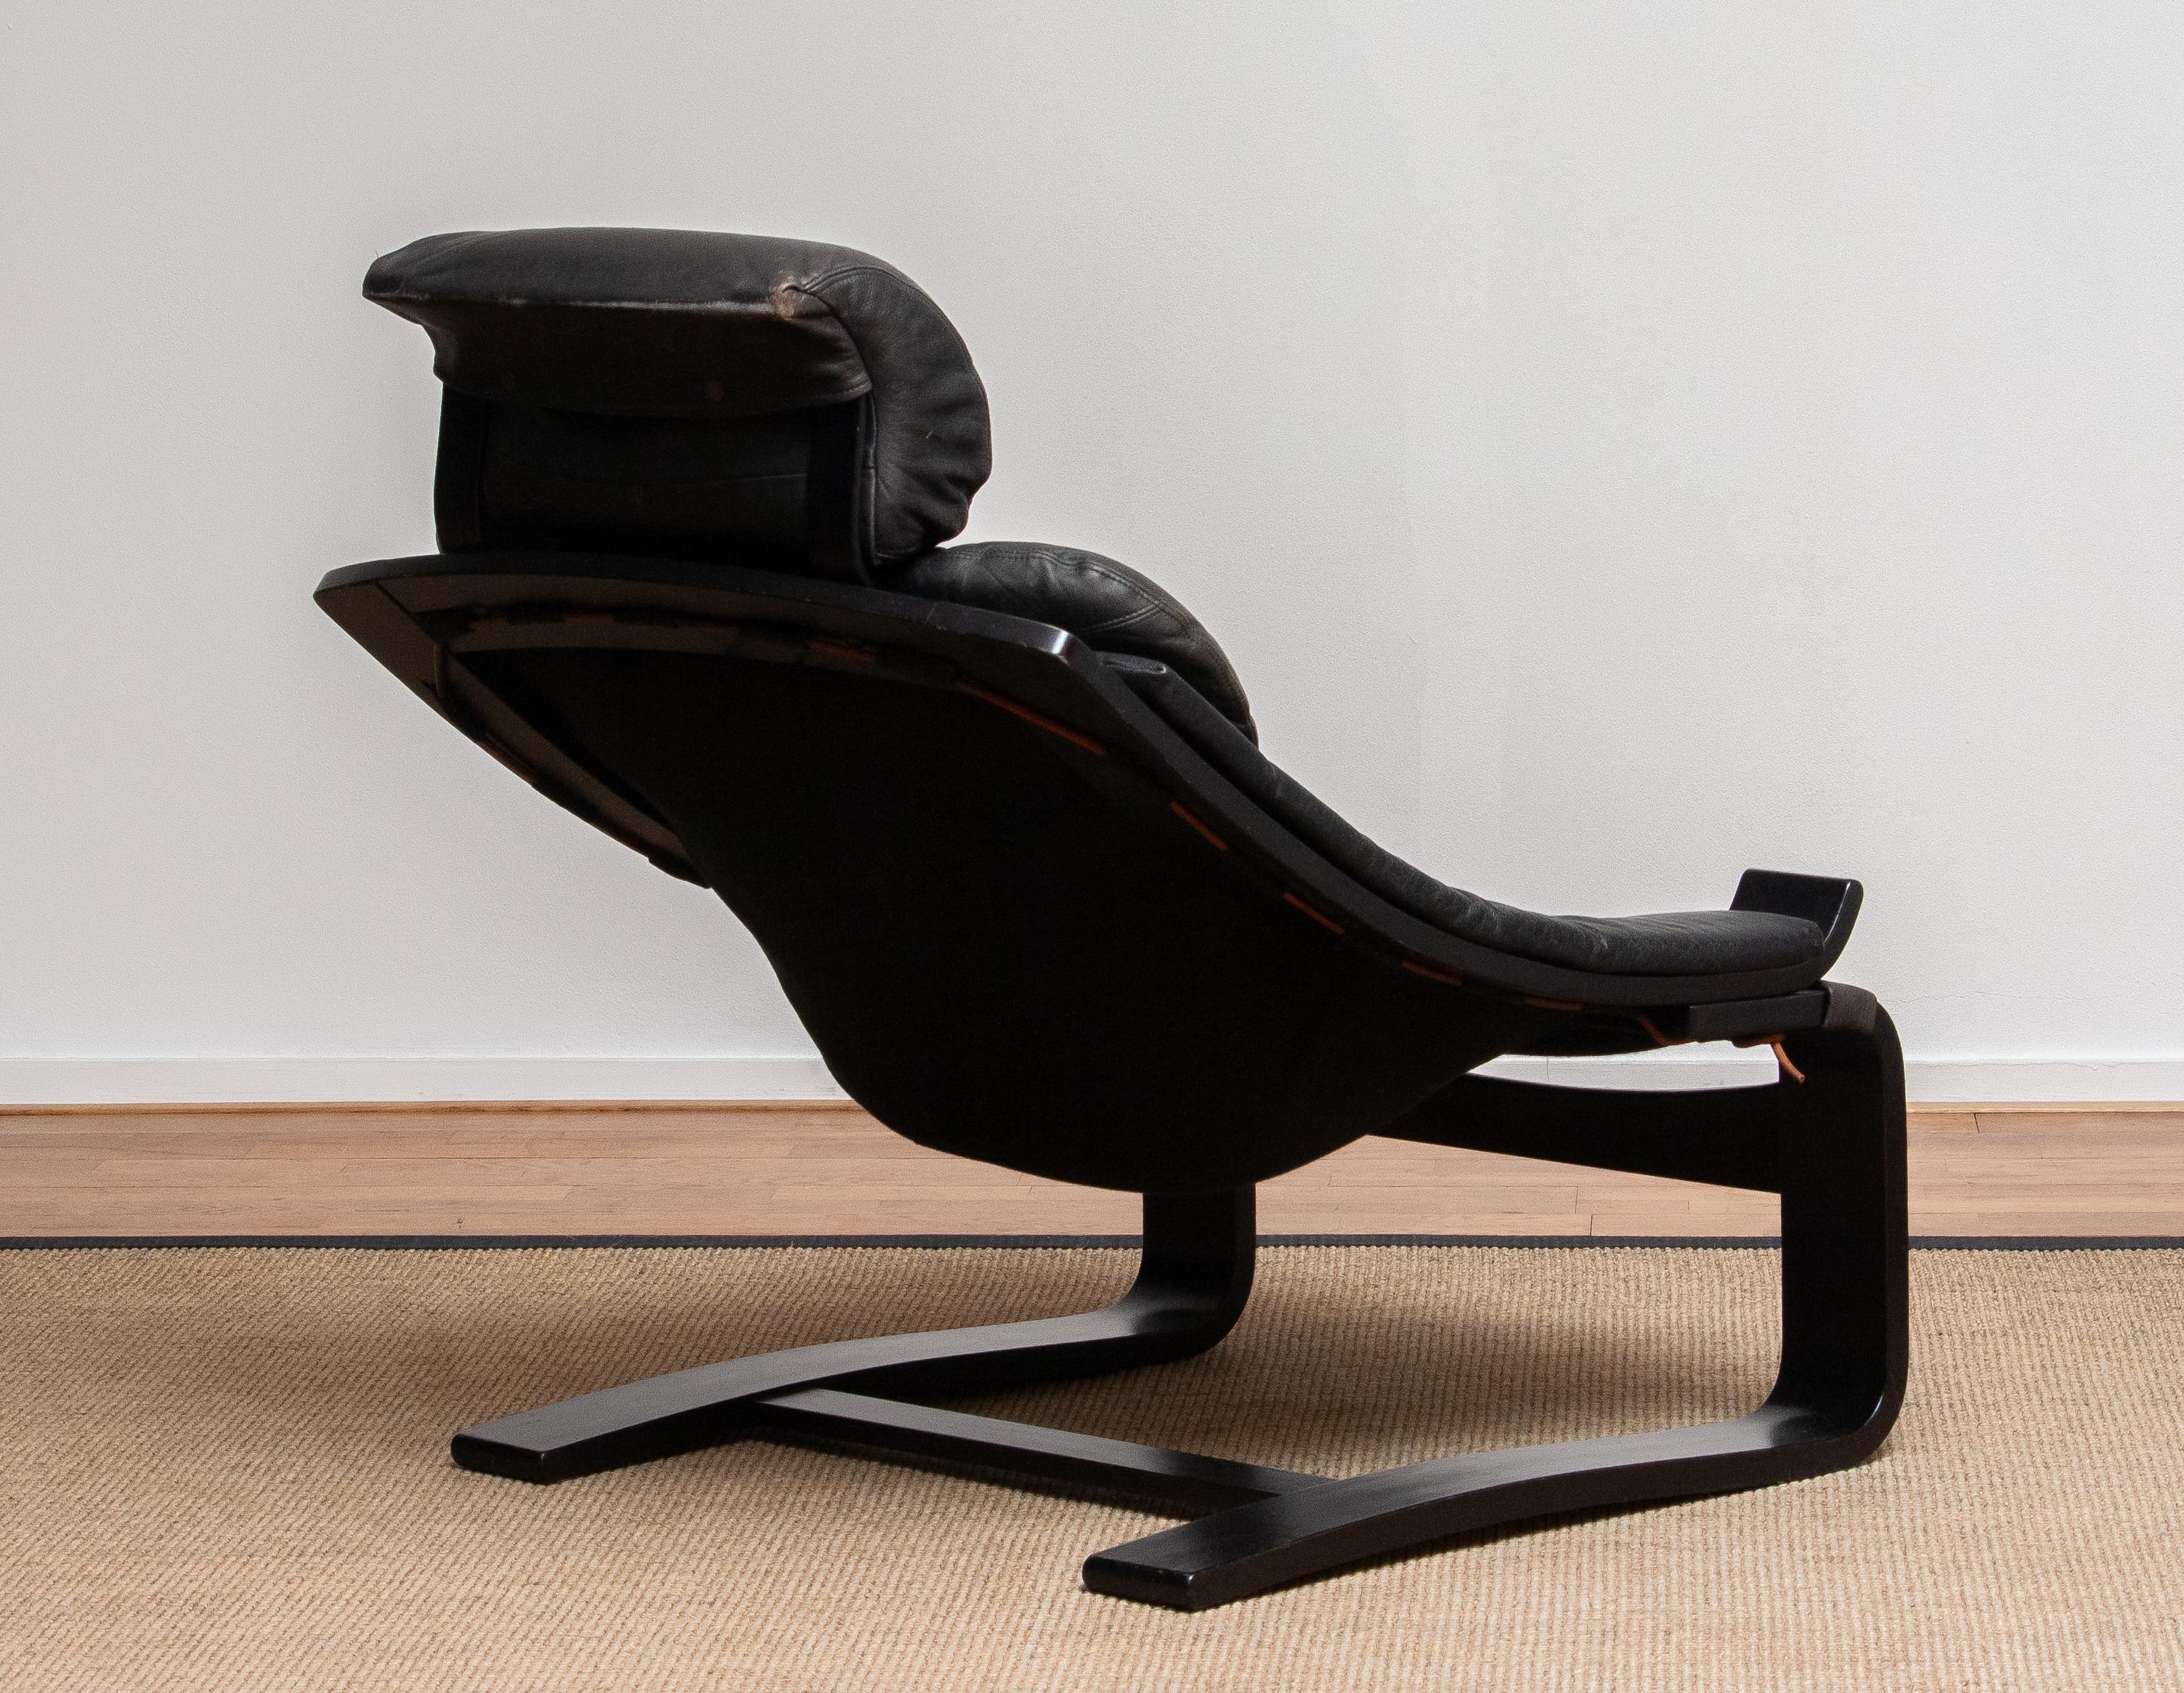 1970s, Black Leather Club Lounge Chair by Ake Fribytter for Nelo, Sweden 1